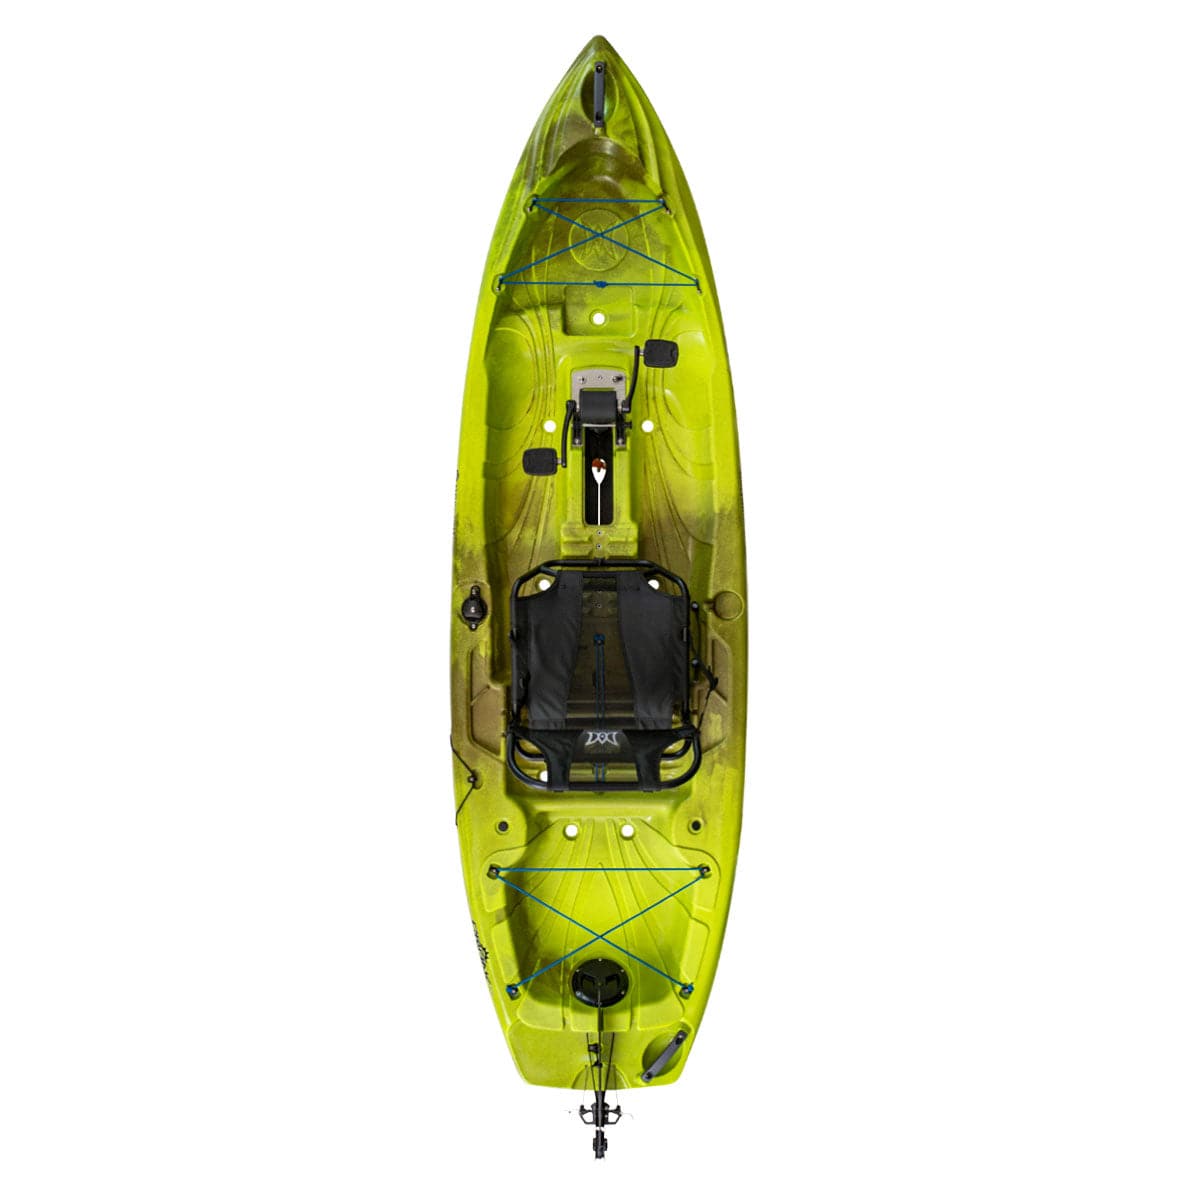 Featuring the Crank 10 fishing kayak, pedal drive kayak manufactured by Perception shown here from one angle.